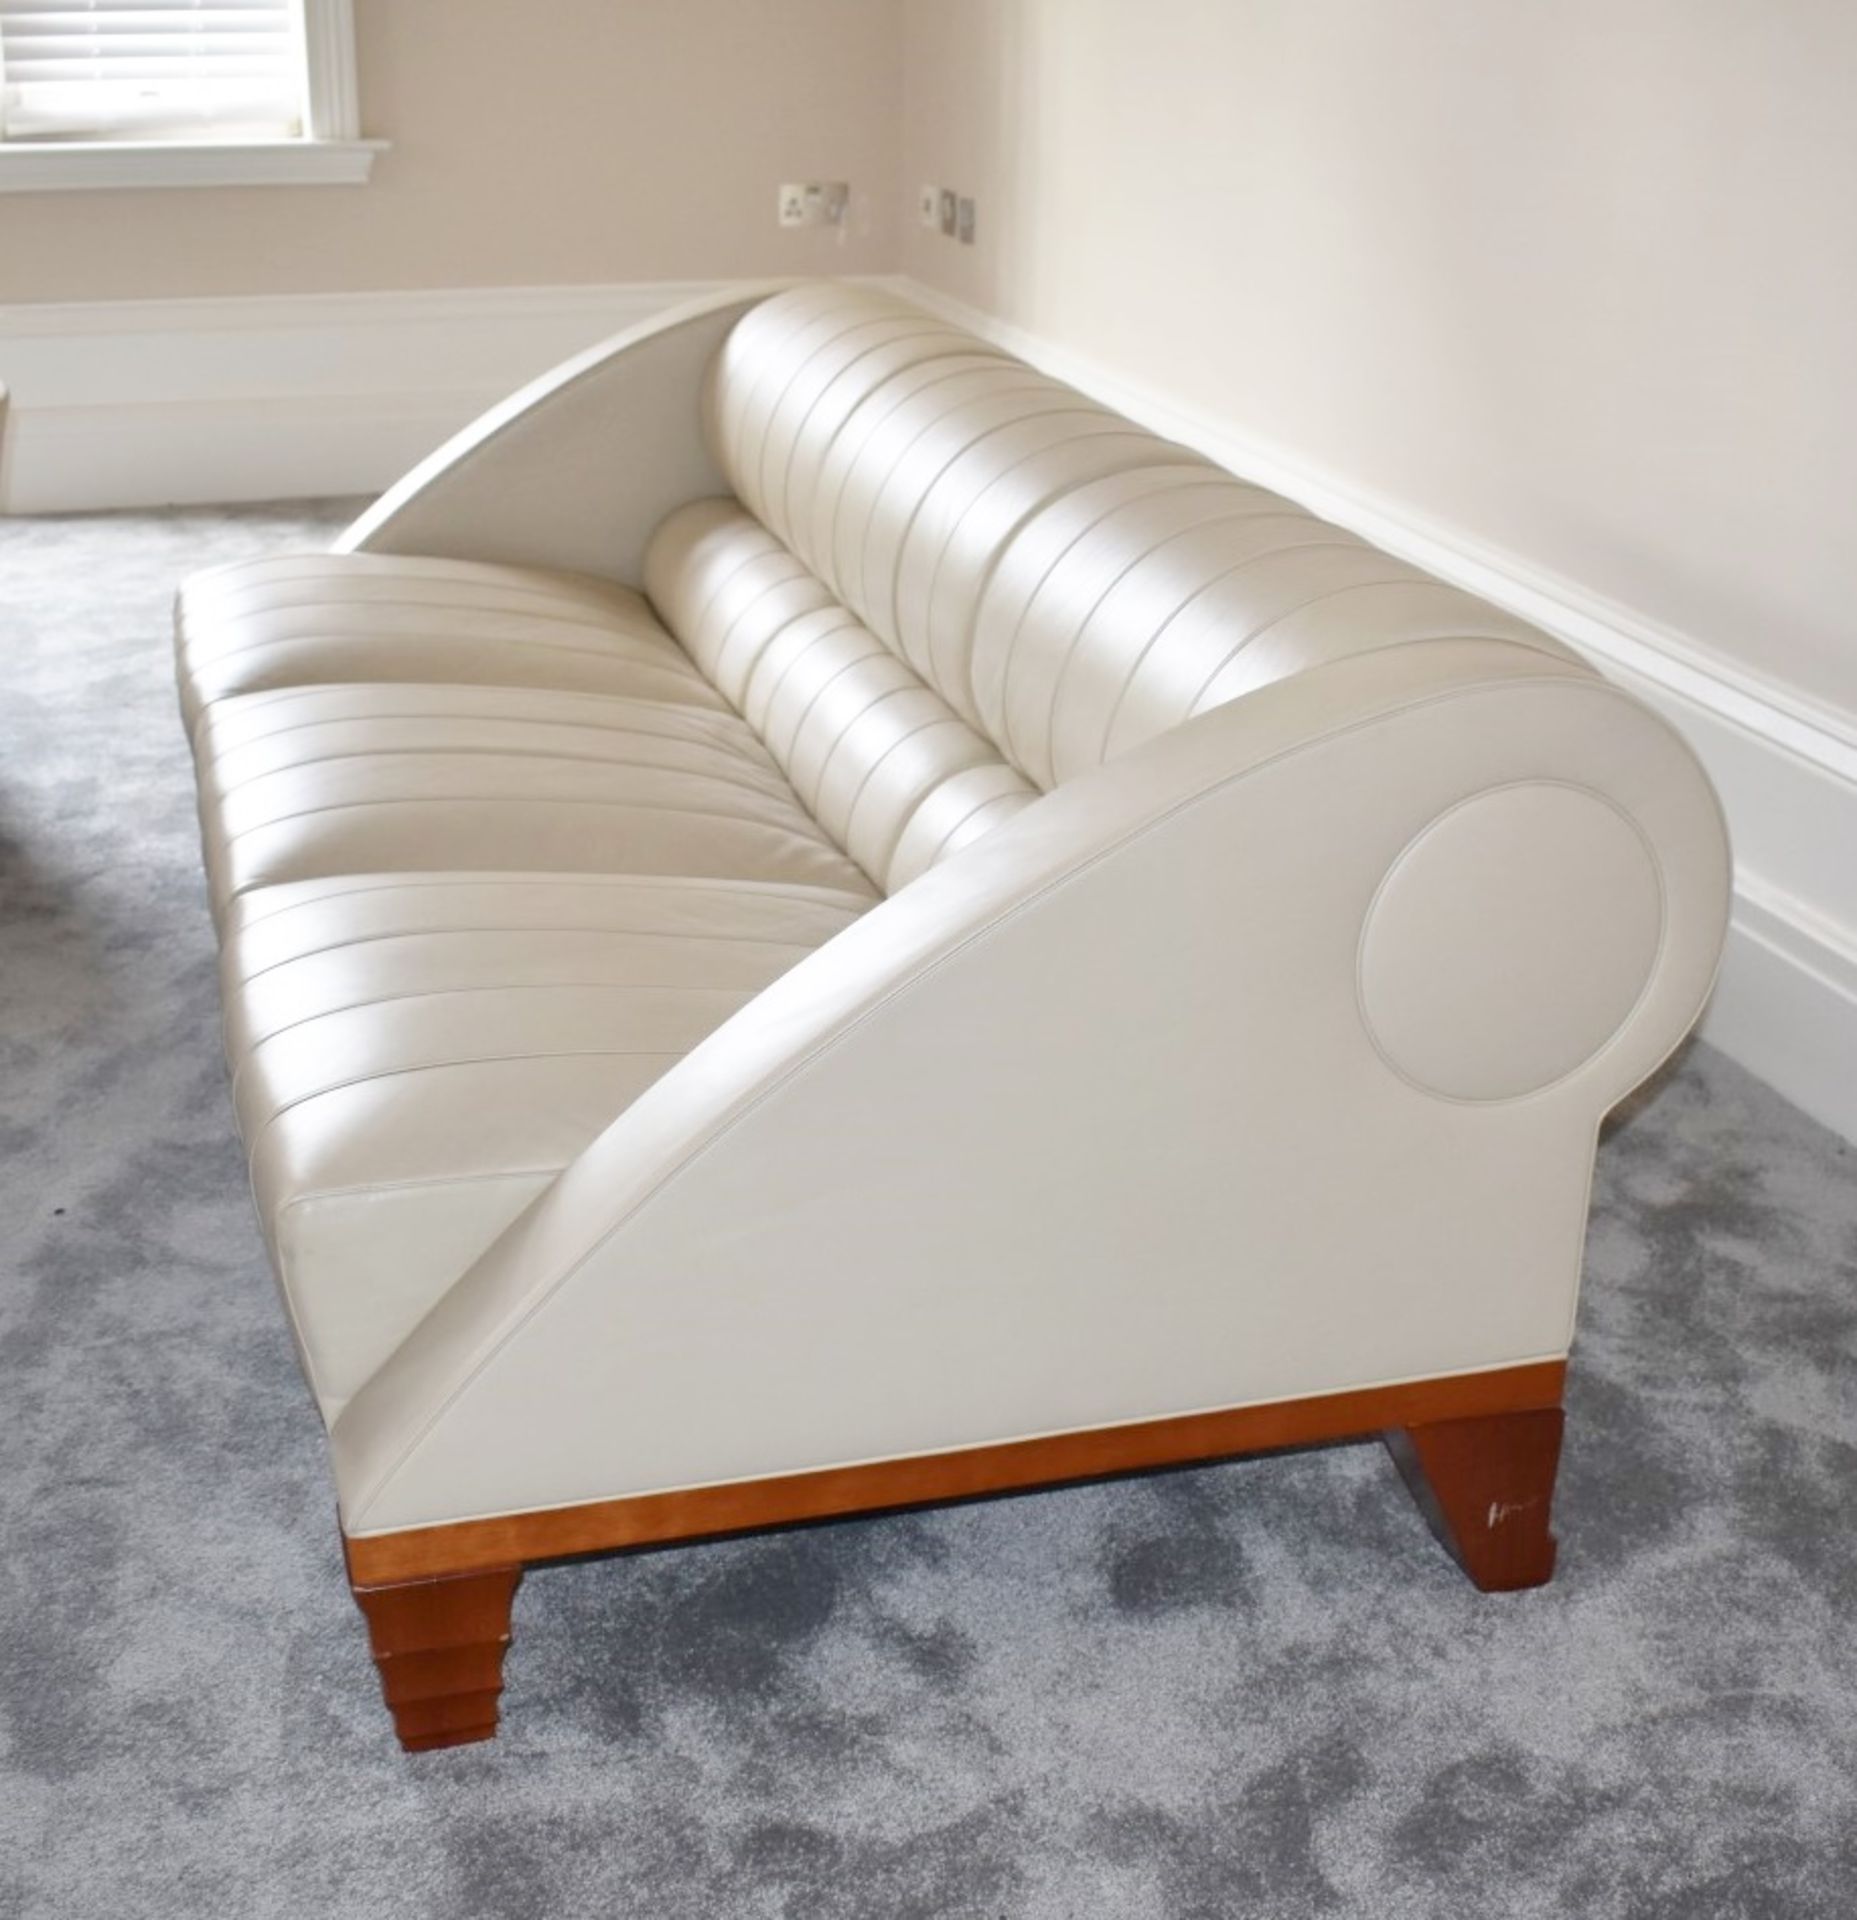 1 x Giorgetti Aries Three Seater Leather Sofa - Designed by Leon Krier - Contemporary Sofa - Image 10 of 10